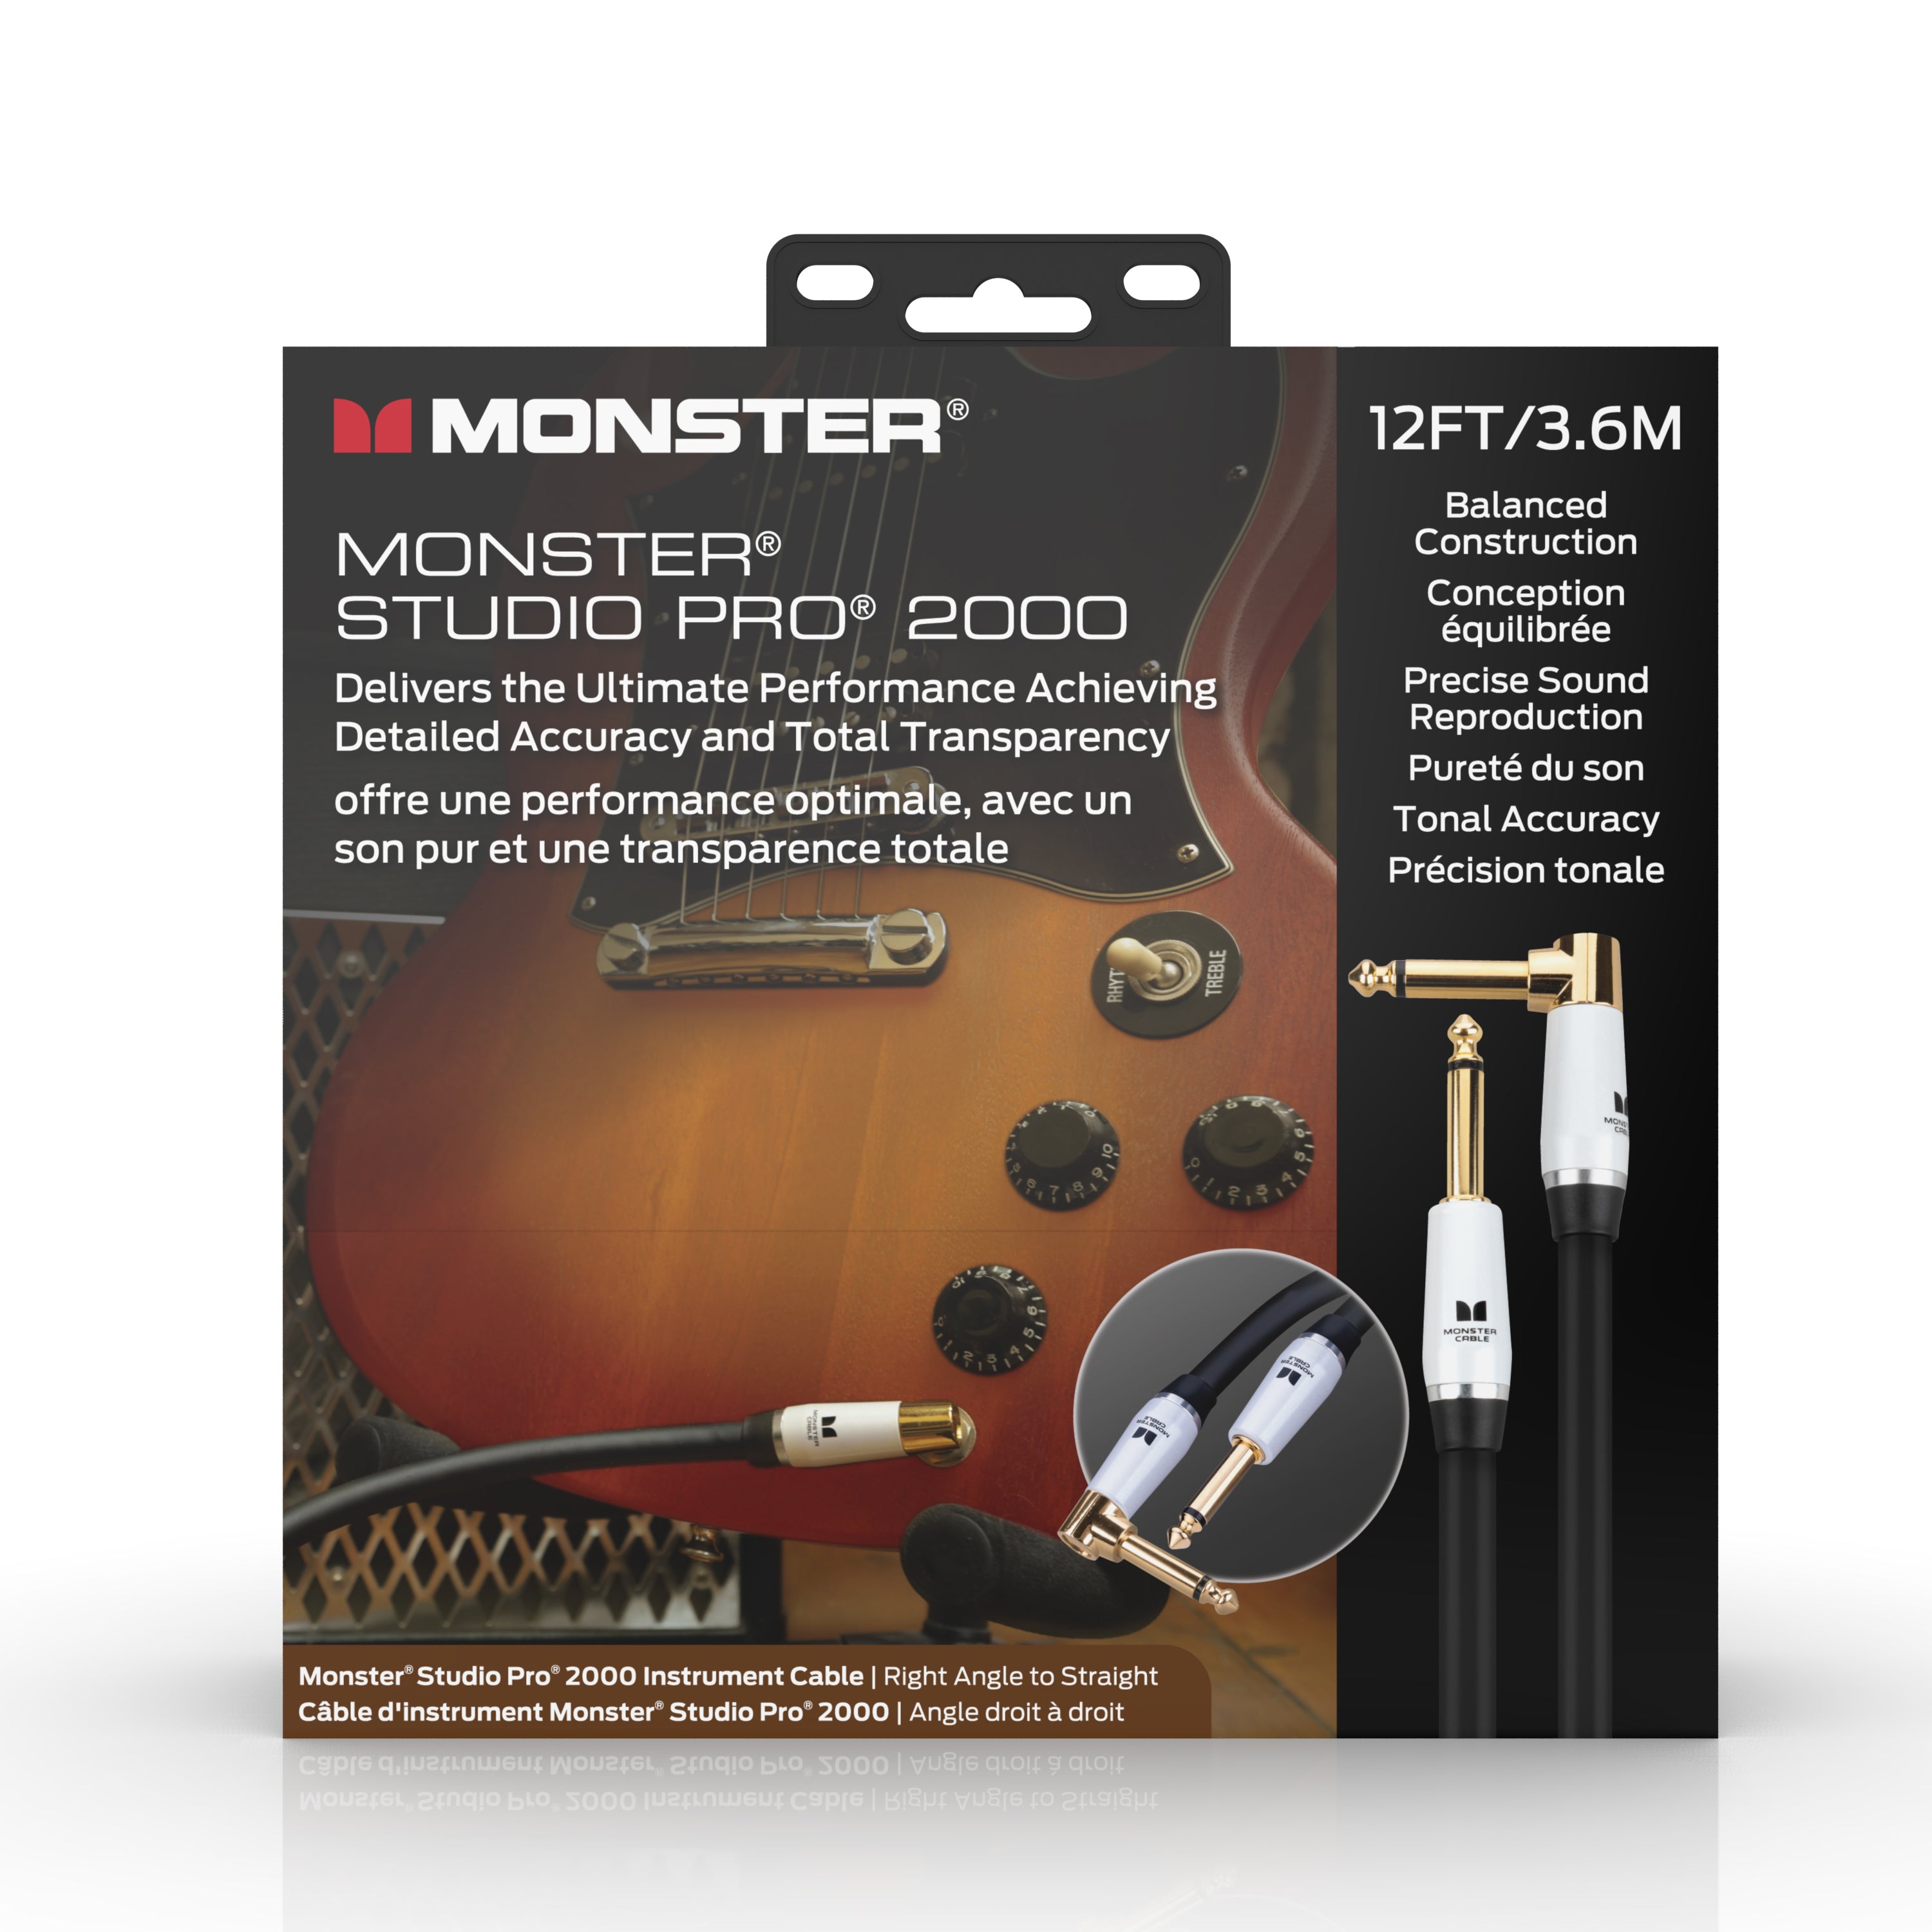 Monster® Prolink Studio Pro 2000 Instrument Cable - HIENDGUITAR Straight-Angle / 12ft(3.6m) Straight-Angle Monstercable Cables